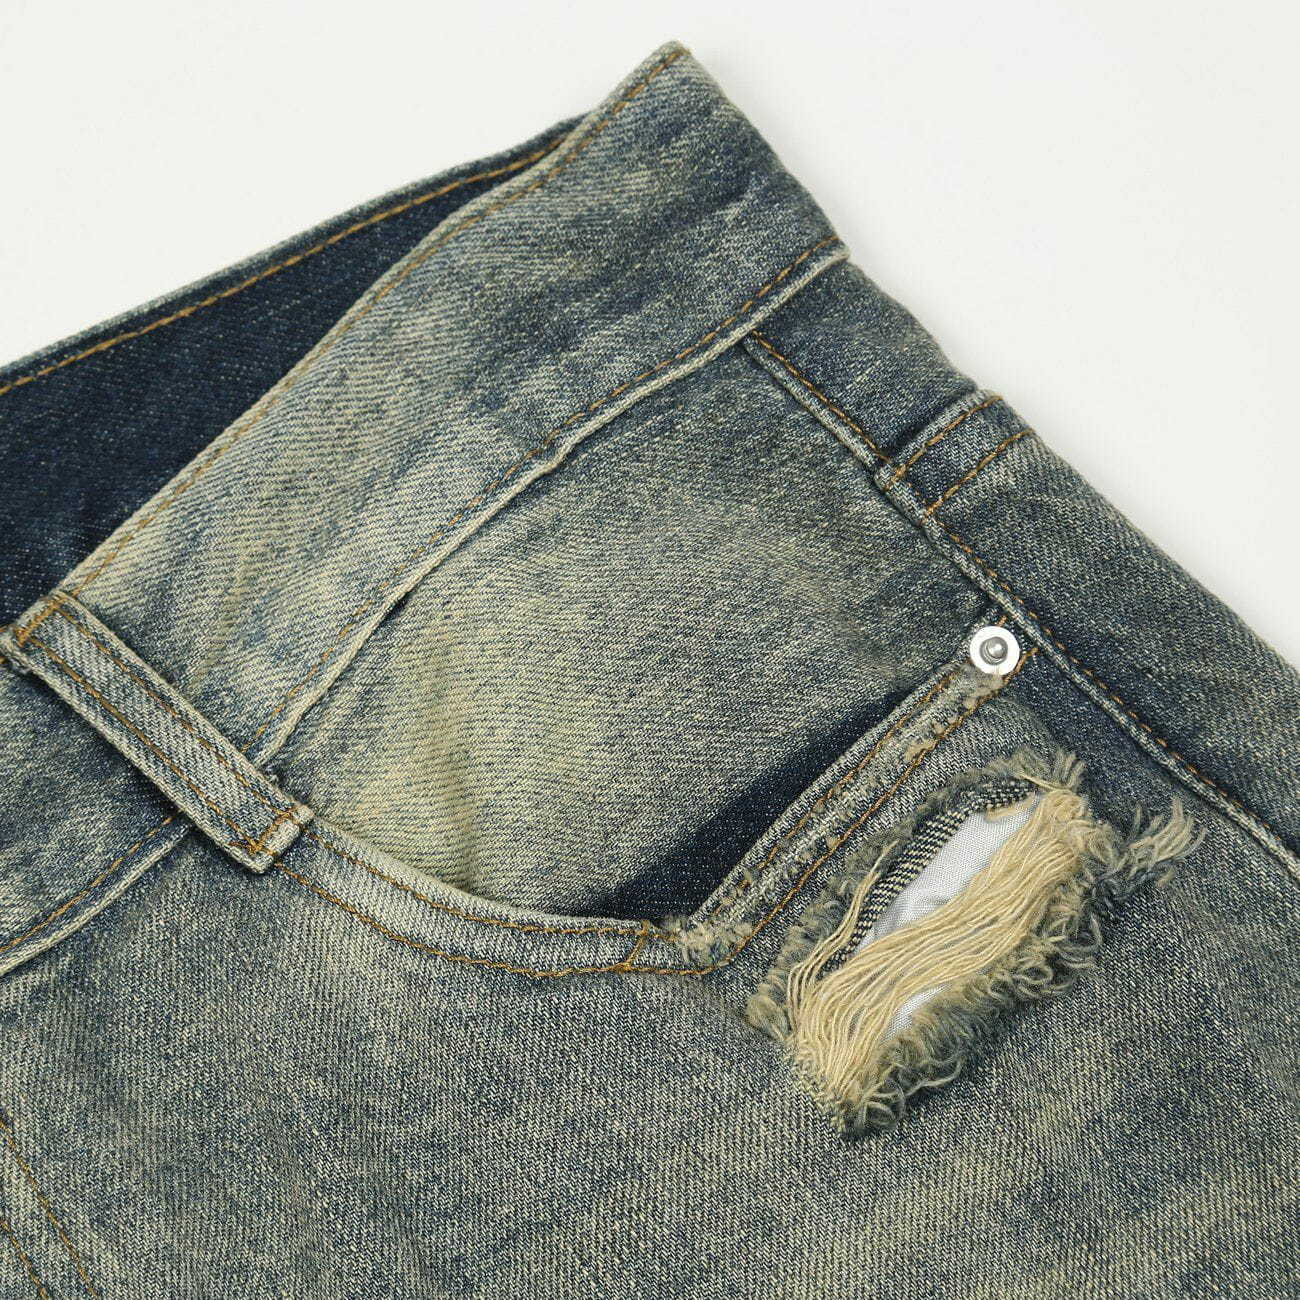 edgy washed hole jeans urban streetwear 2448